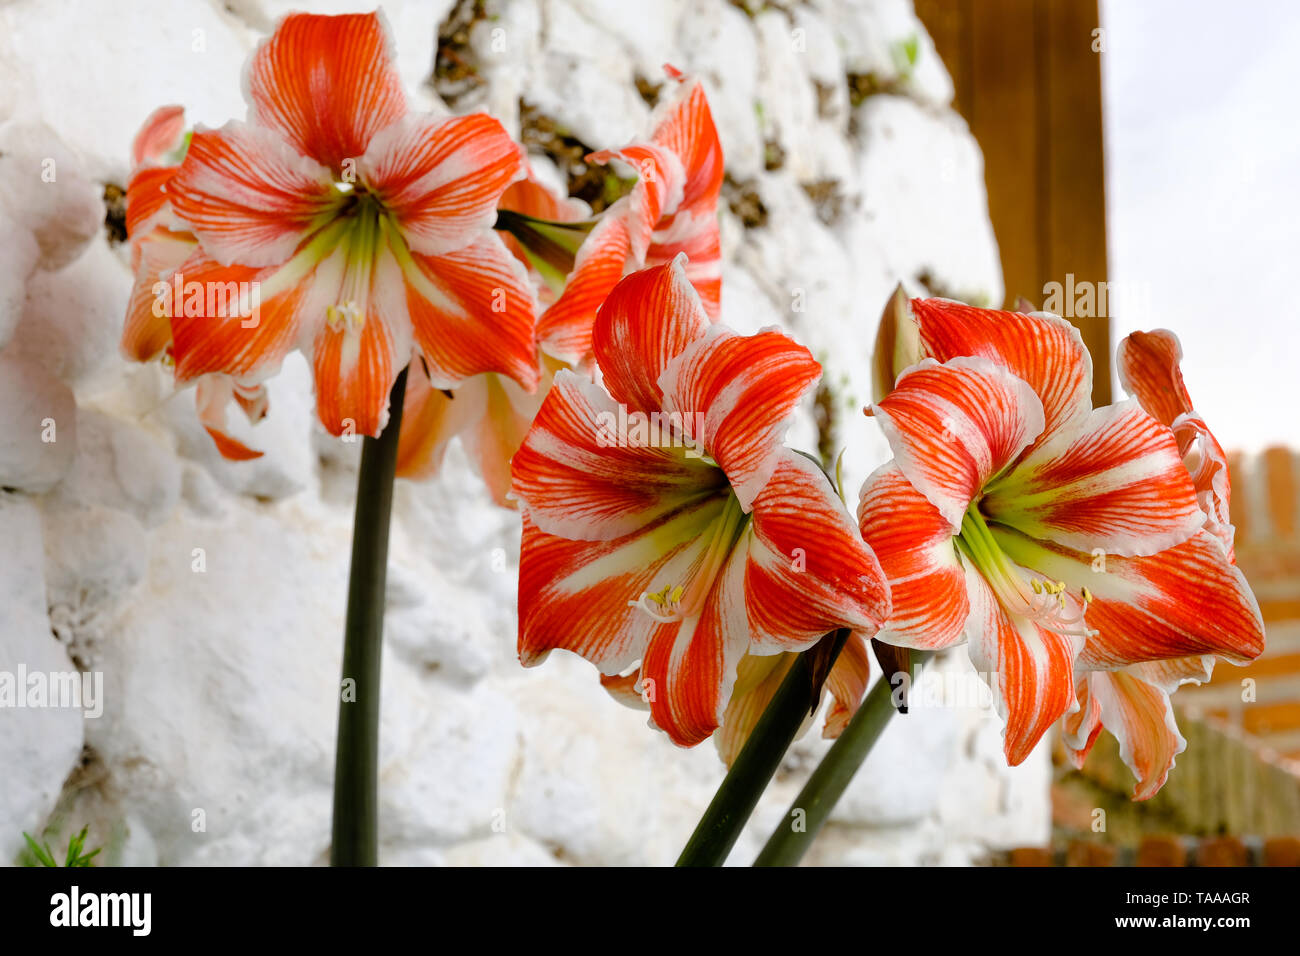 Candy Cane Lillies, Amarylis in Comares, Axarquia, Malaga, Andalucia, Costa del Sol, Spain Stock Photo